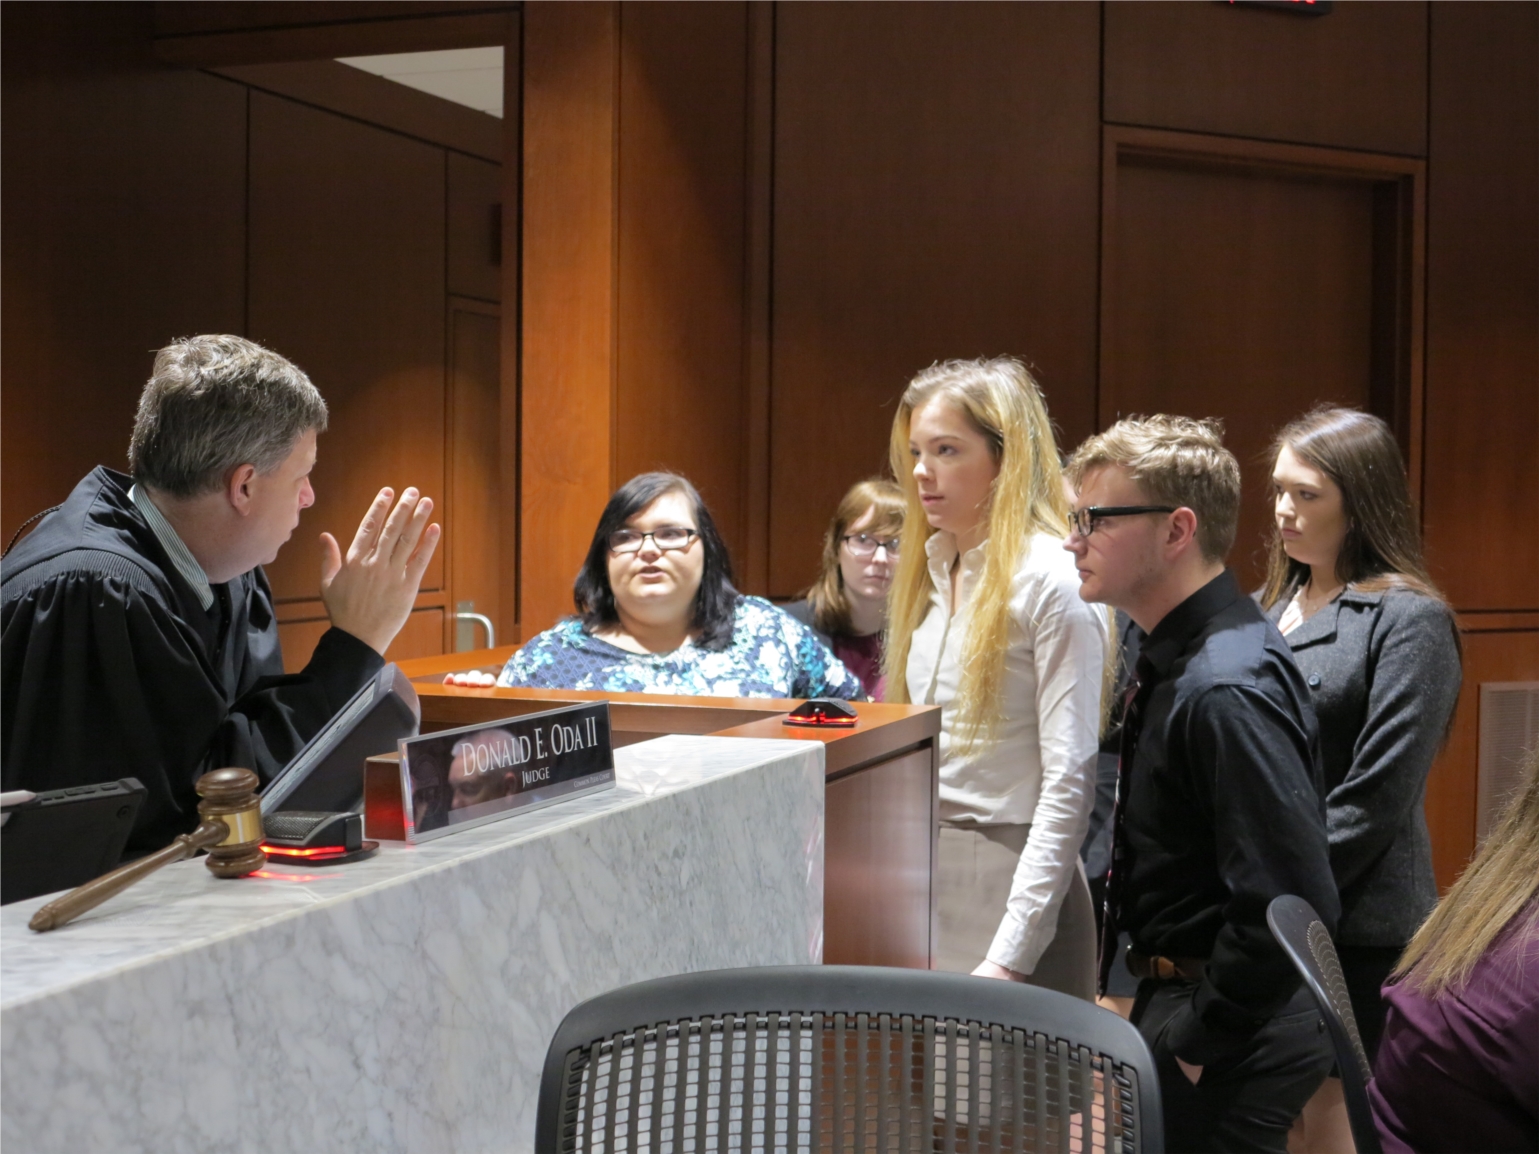 Legal Office and Criminal Justice high school students experience a Mock Trial each year